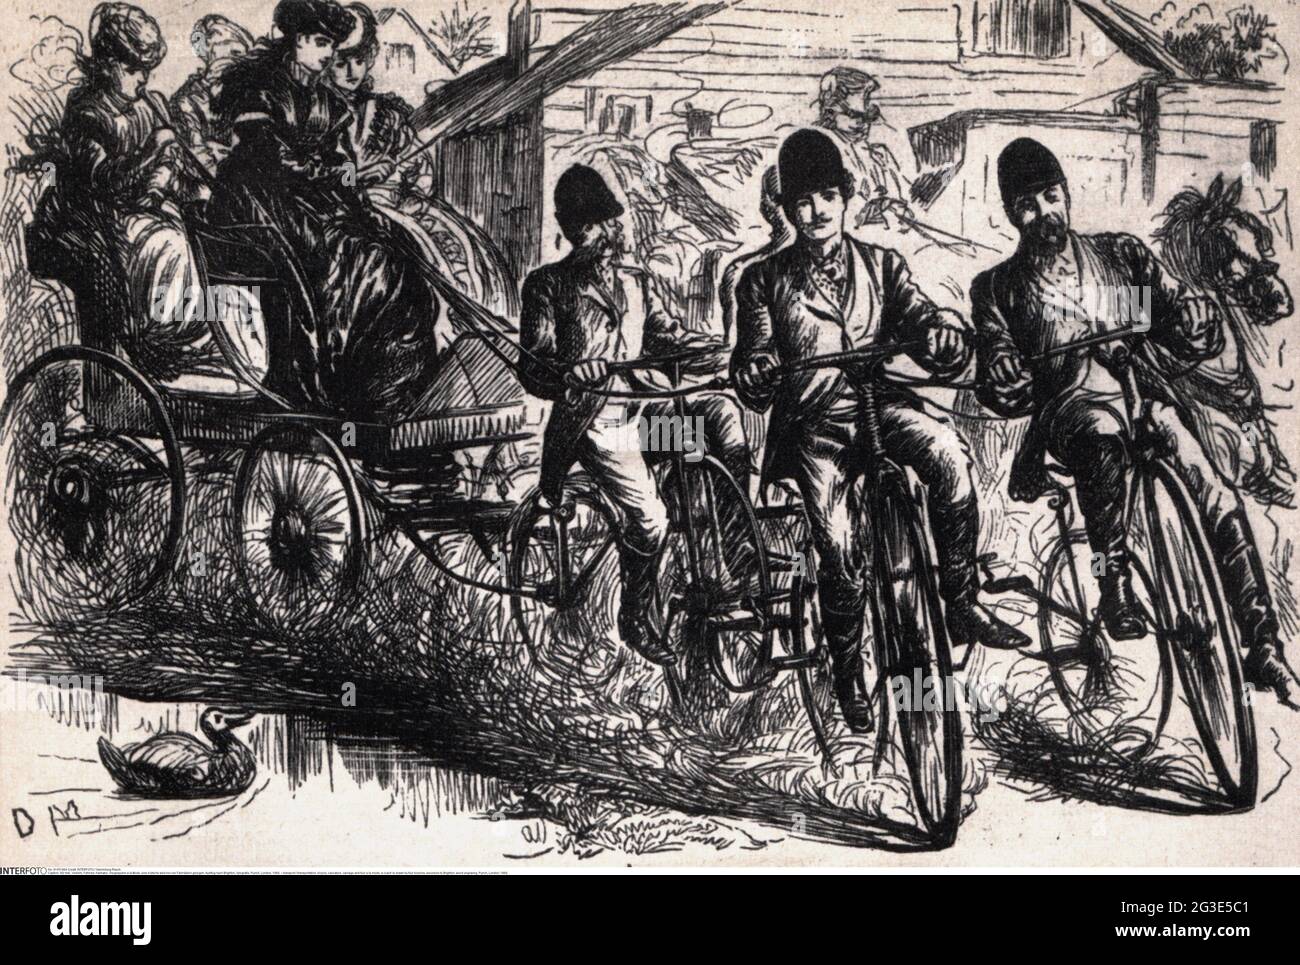 transport / transportation, bicycle, caricature, carriage and four a la mode, ARTIST'S COPYRIGHT HAS NOT TO BE CLEARED Stock Photo